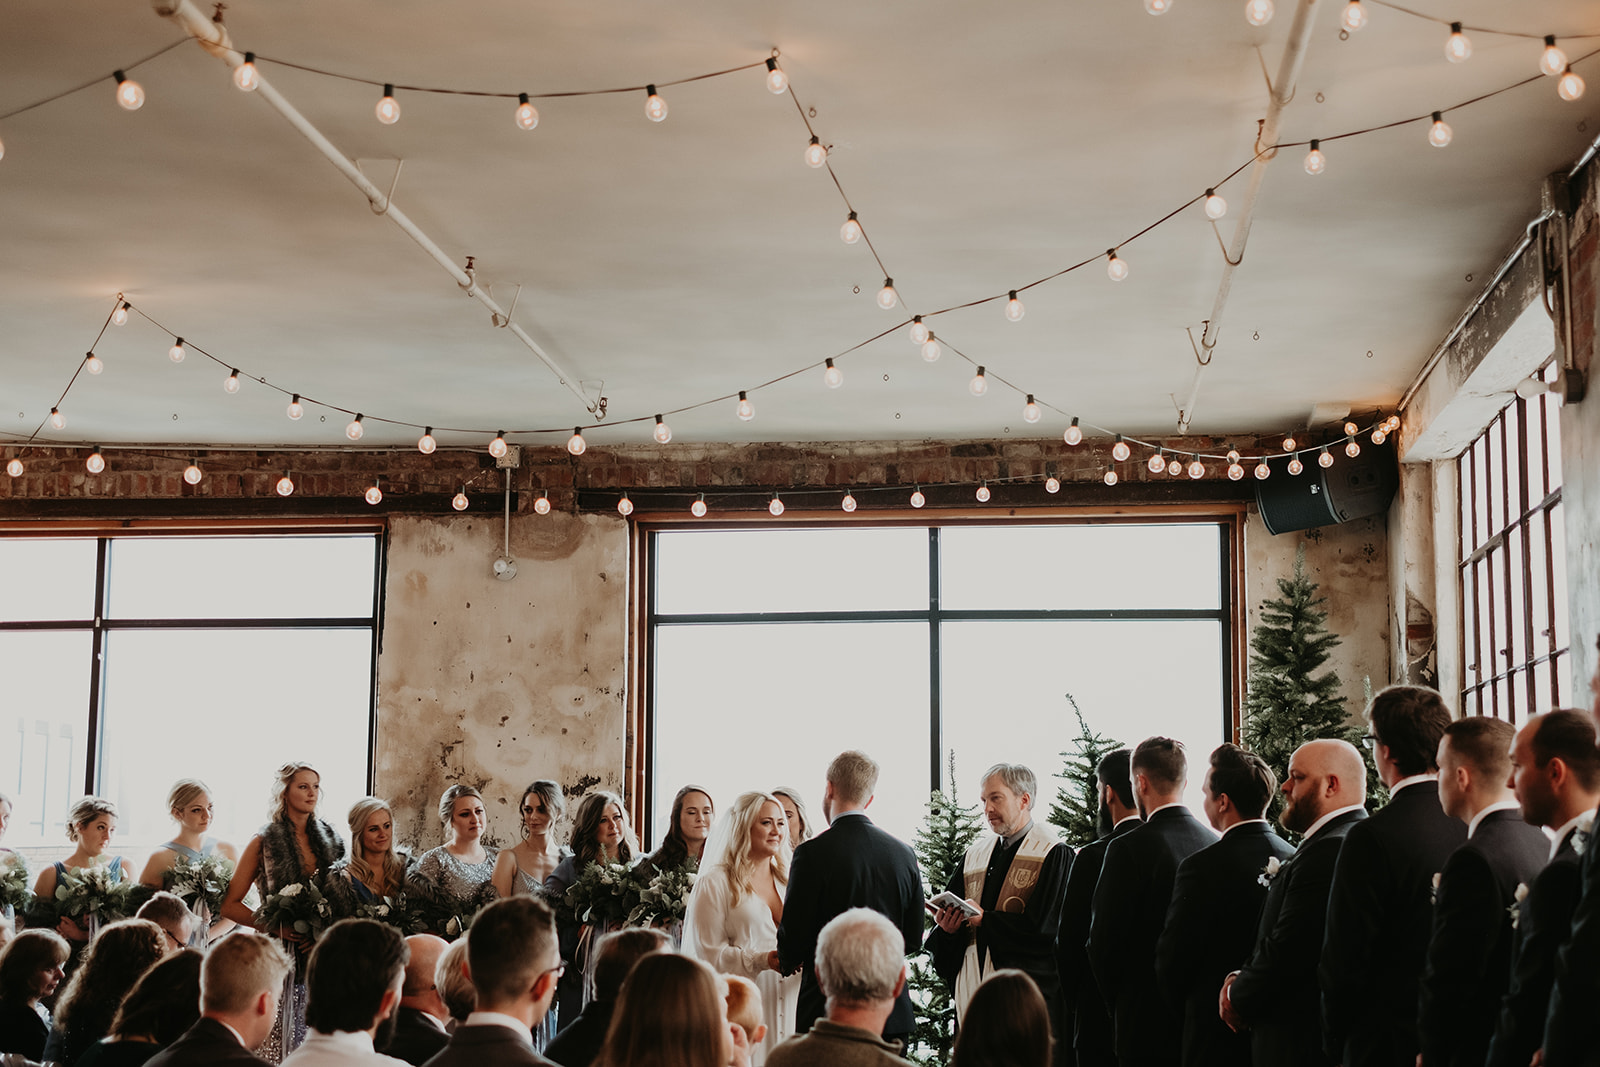 Winter Wedding Ceremony with String Lights, Bride and Groom at an Industrial Venue